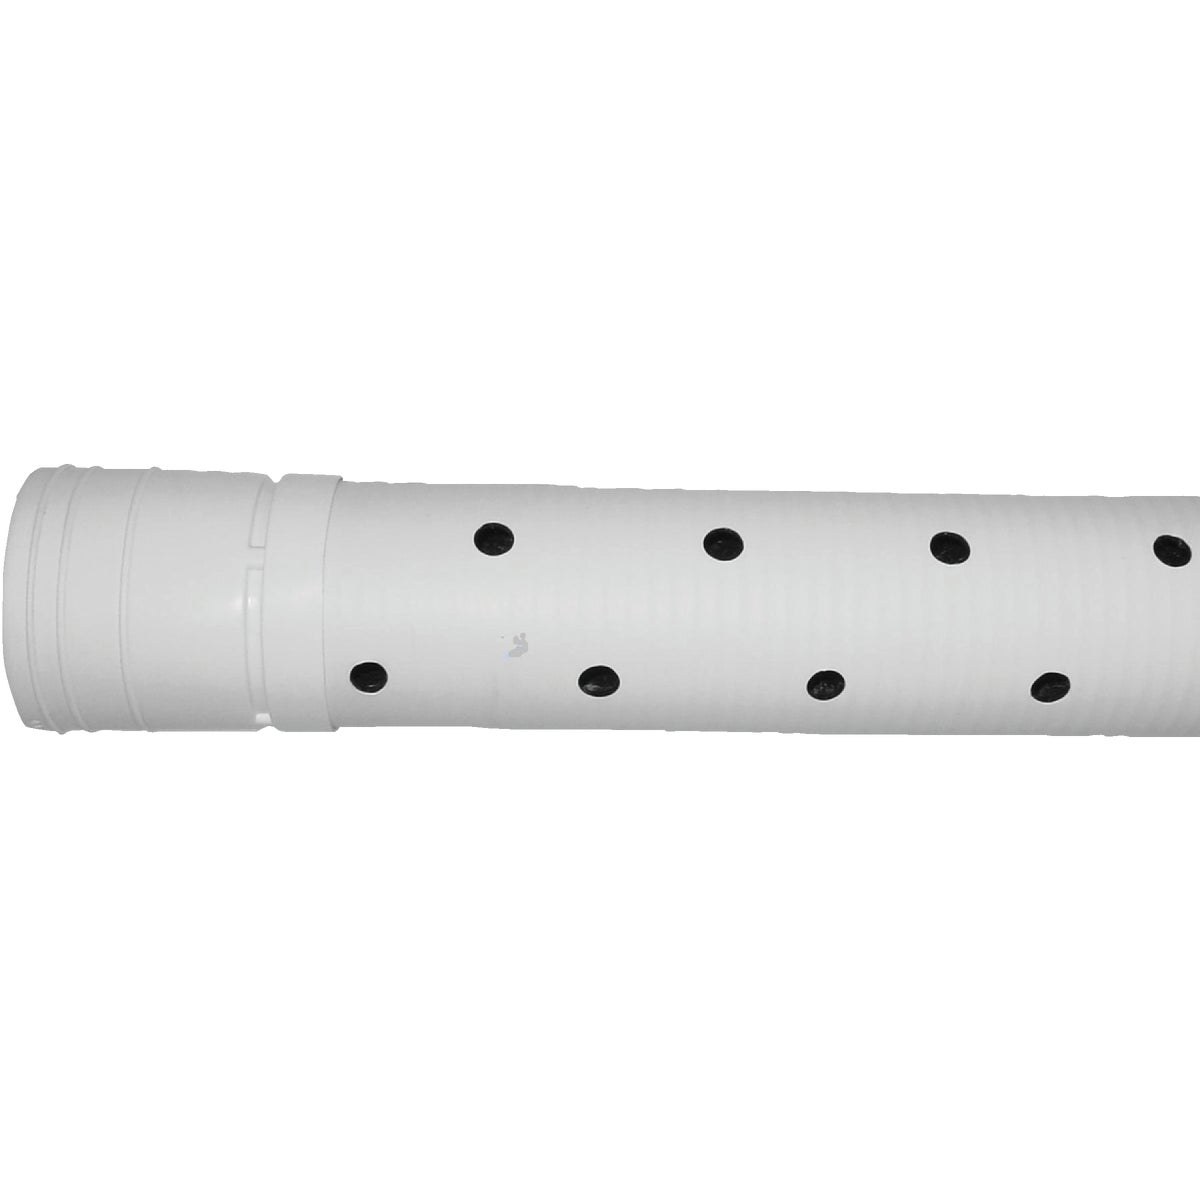 Advanced Drainage Systems 3 In. X 10 Ft. HDPE Perforated Sewage & Drainage Pipe